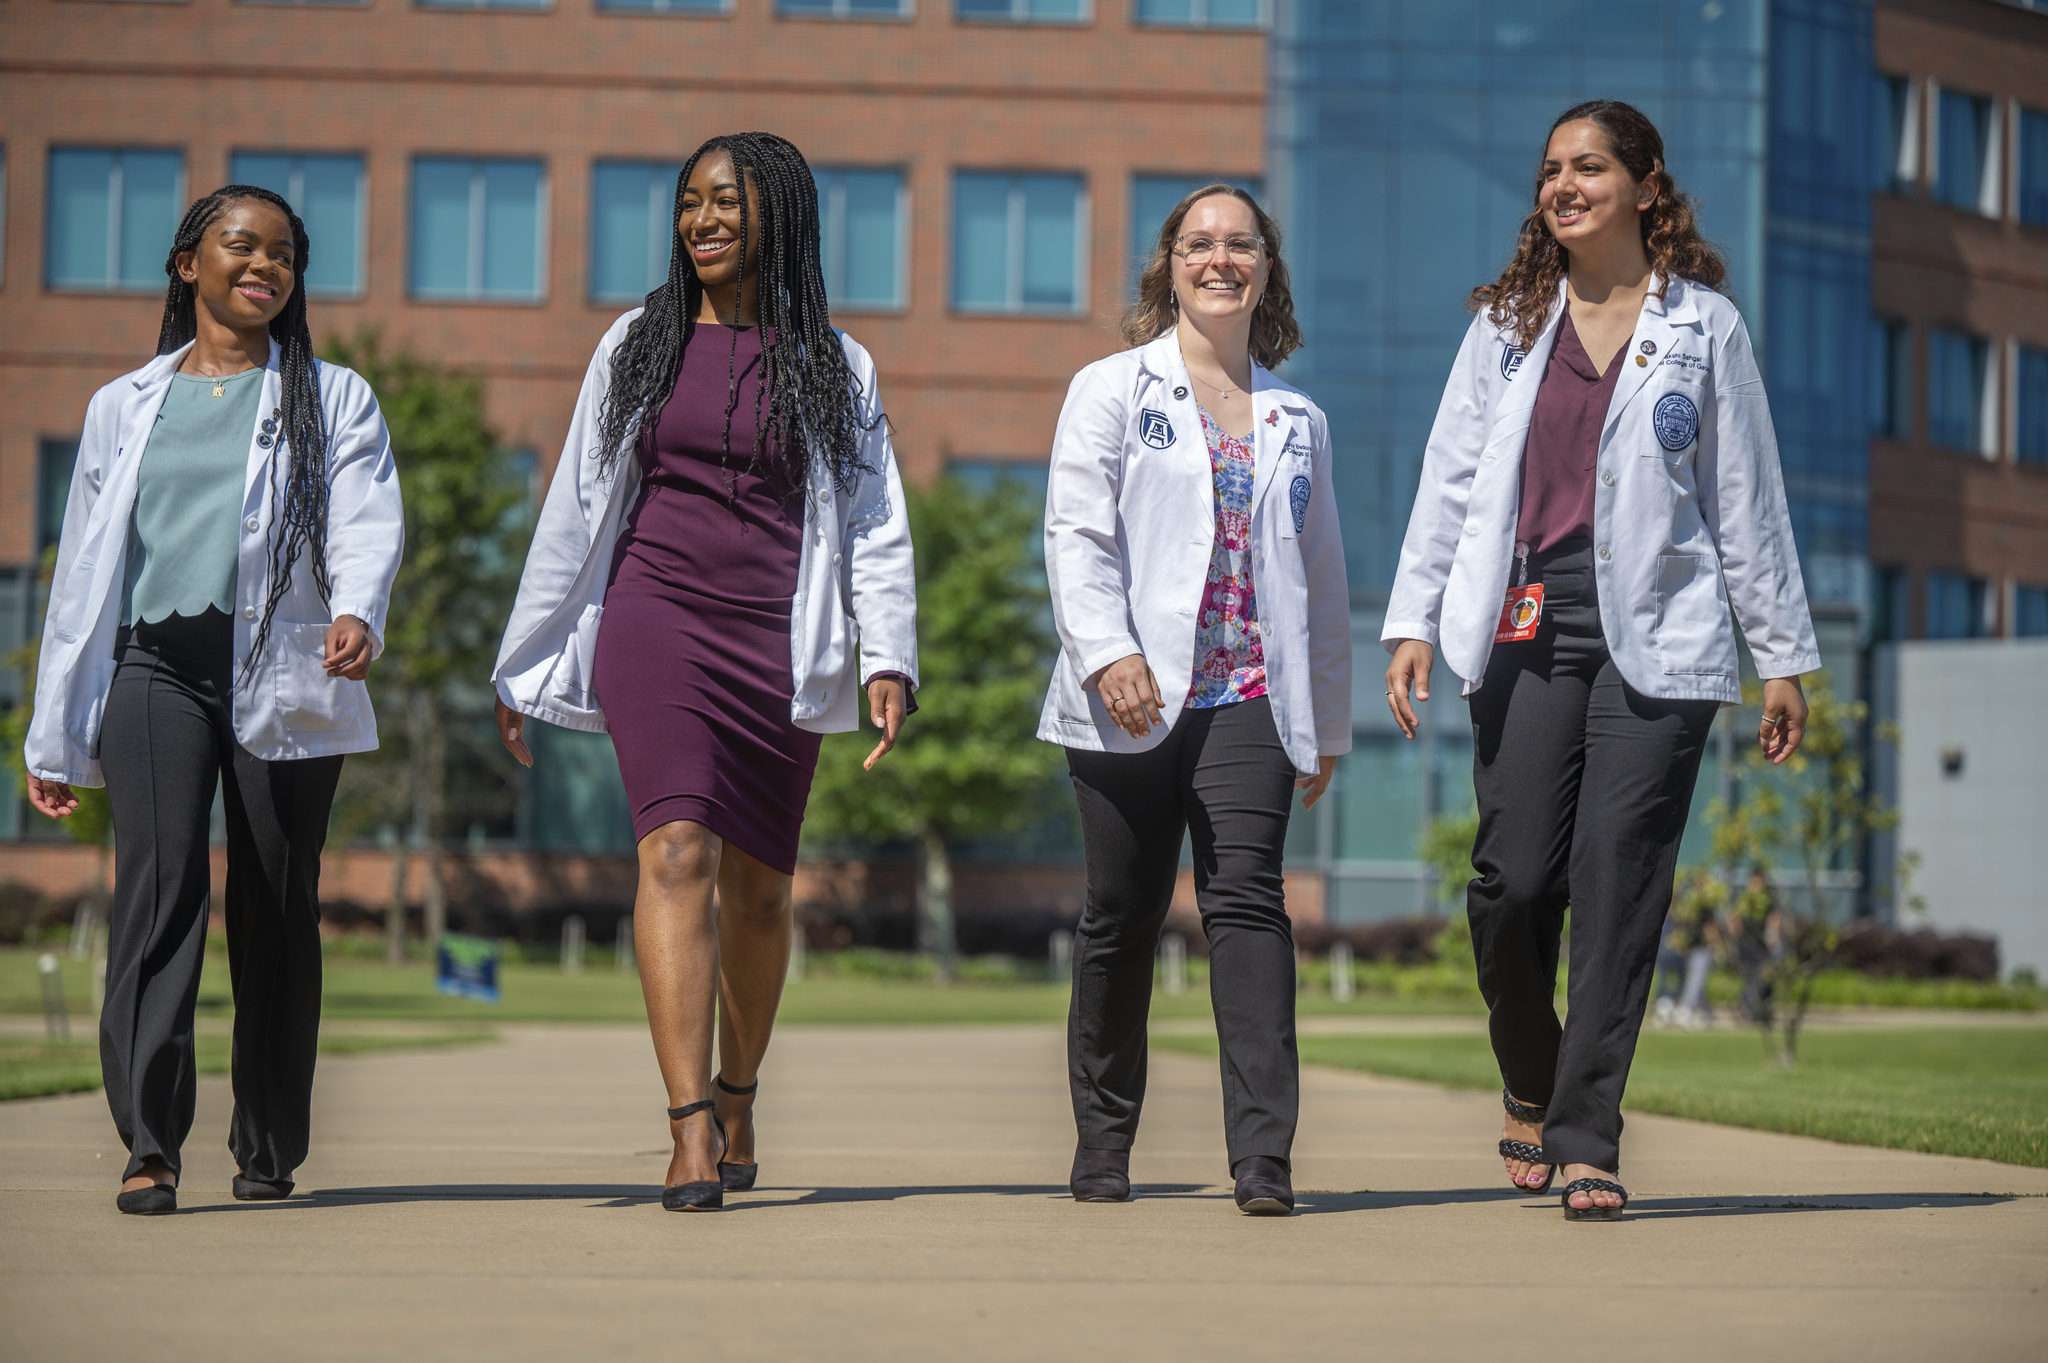 medical students walking ih Harrison Commons building